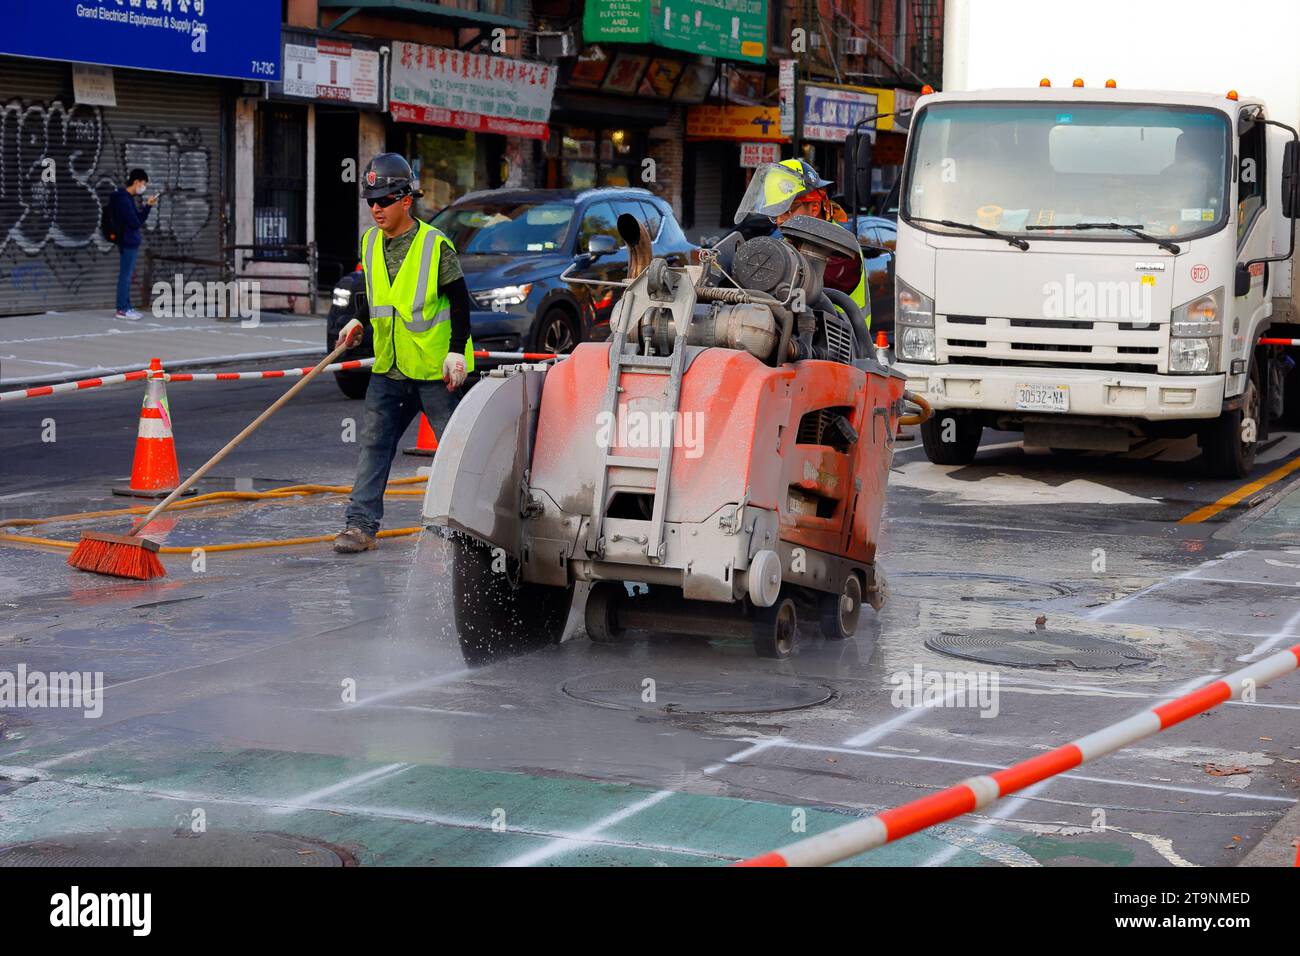 A construction crew operates a Husqvarna FS 7000 self propelled walk behind flat saw, concrete saw on a New York City street. Stock Photo